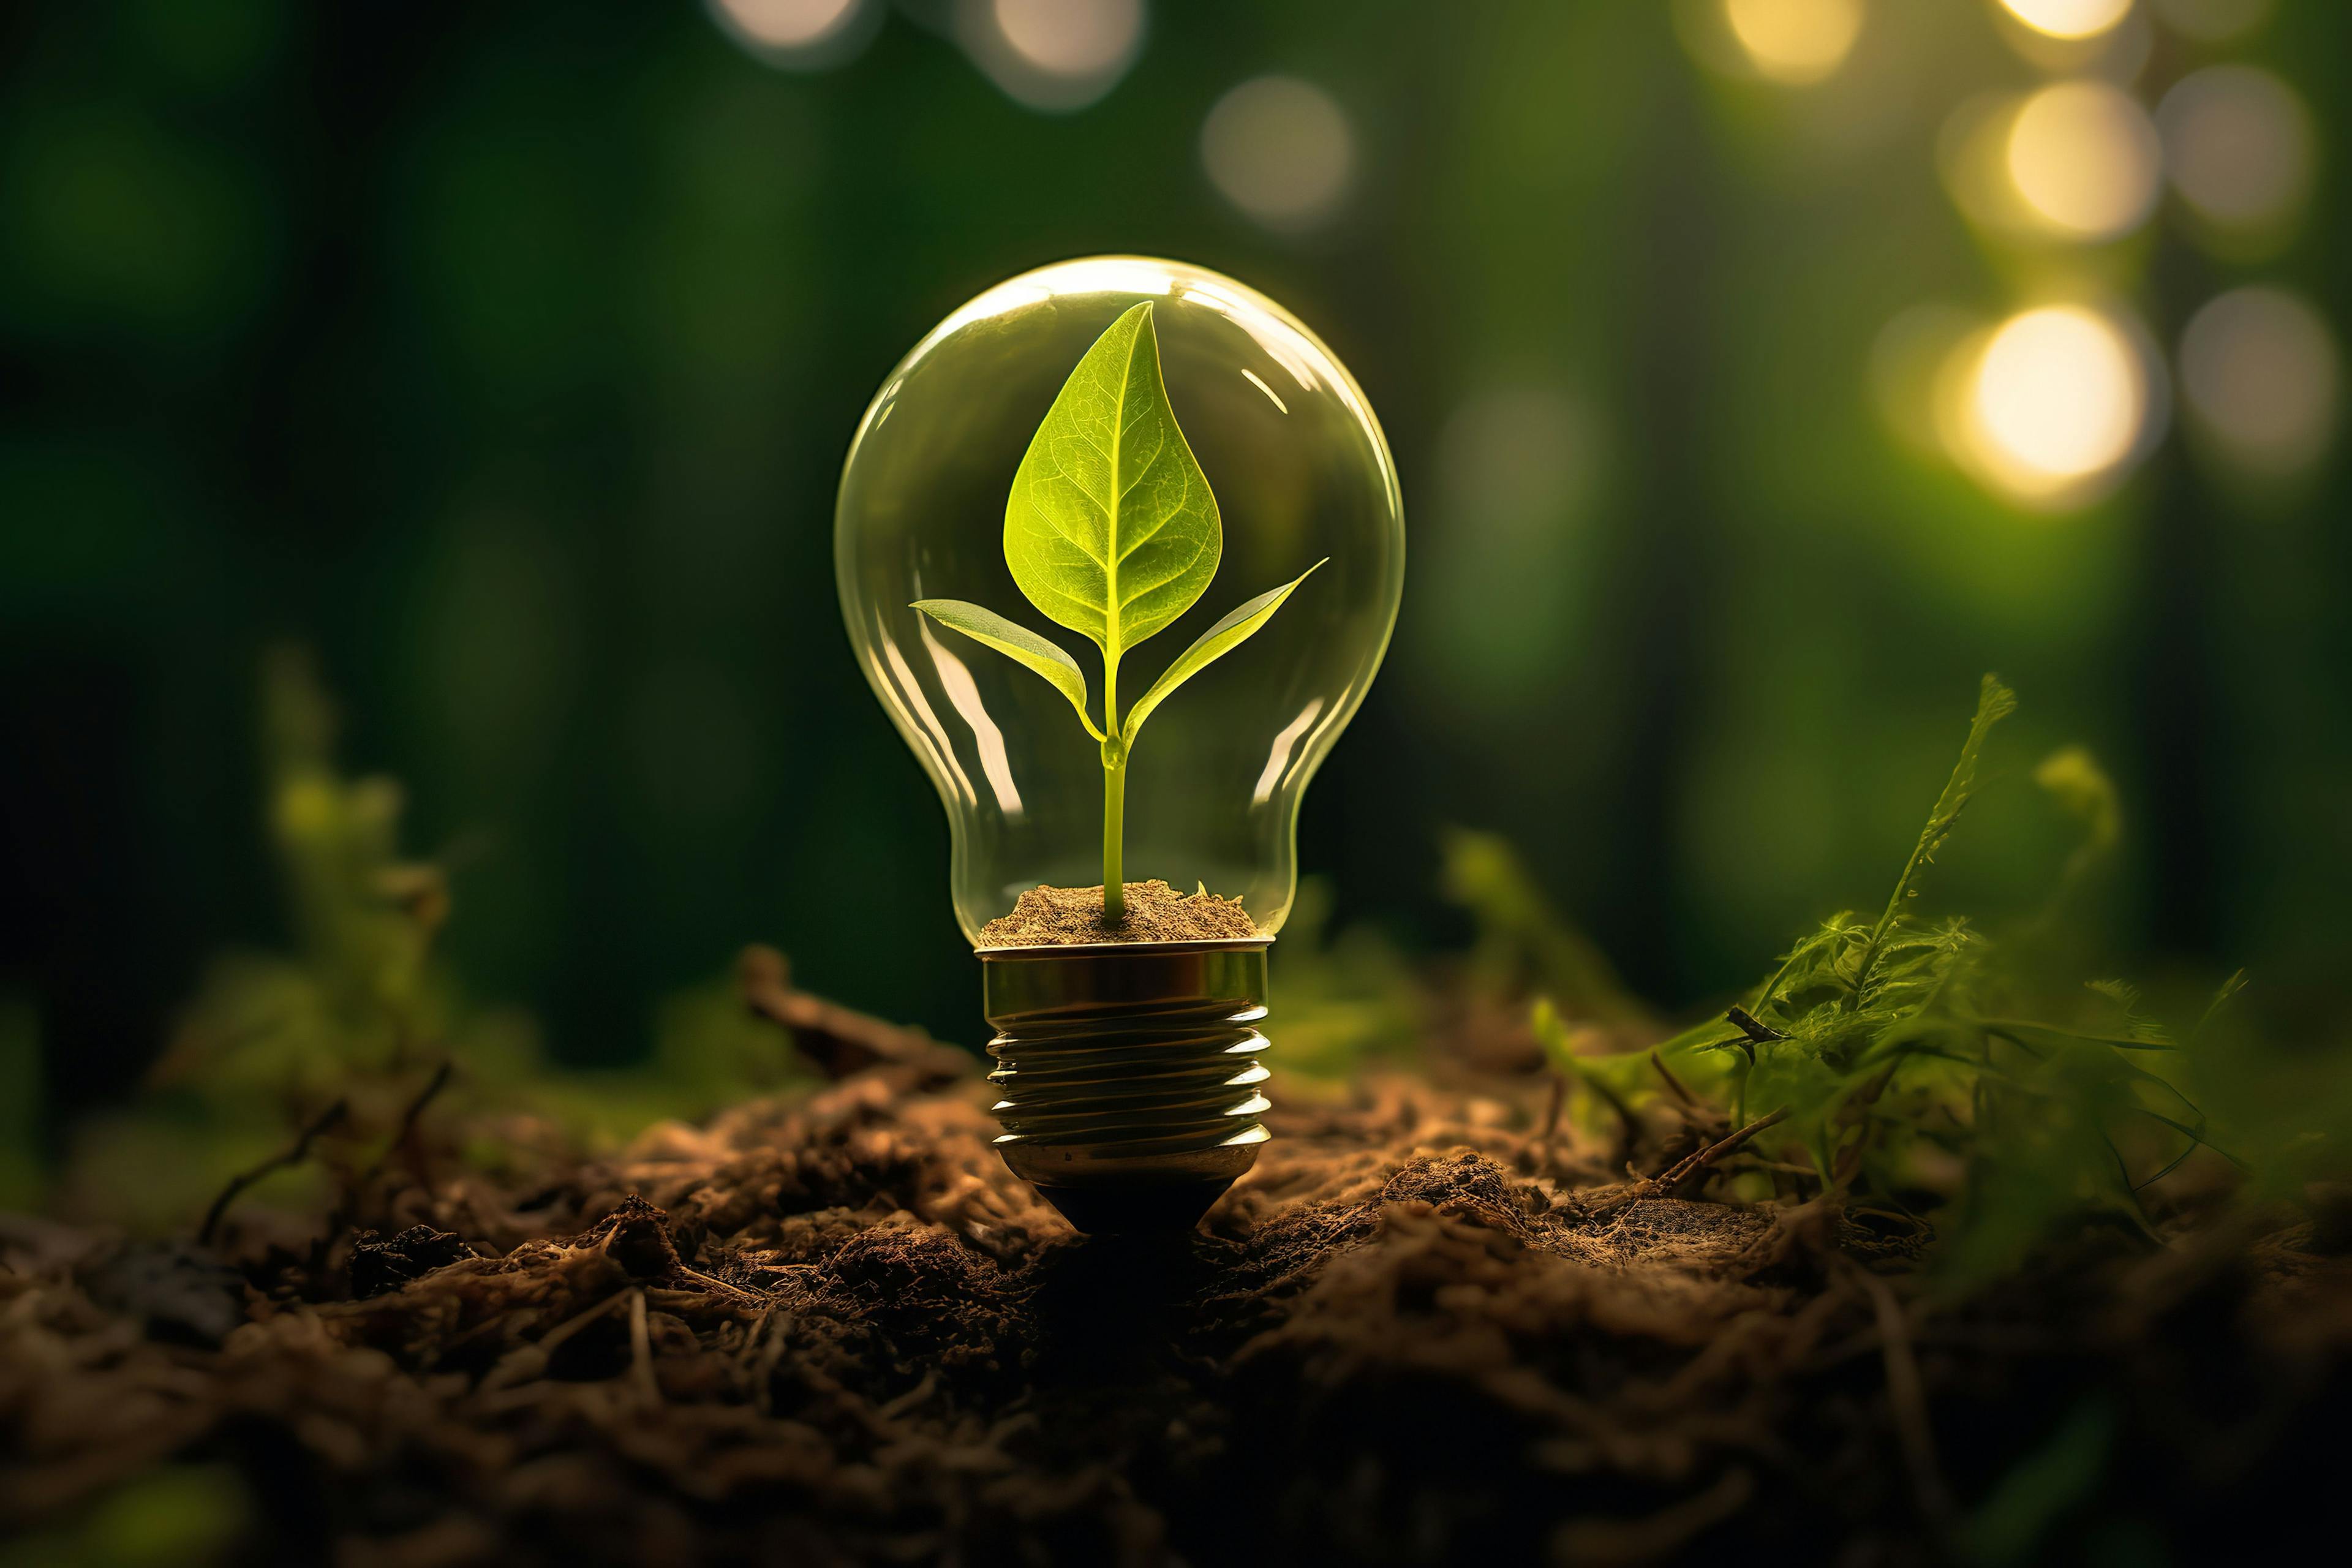 A close-up of a light bulb plant, with its delicate glass bulb and vibrant green leaves. The image is a symbol of growth, new beginnings, and the power of nature to overcome all obstacles. Generated by AI | Image Credit: © wiwid - stock.adobe.com